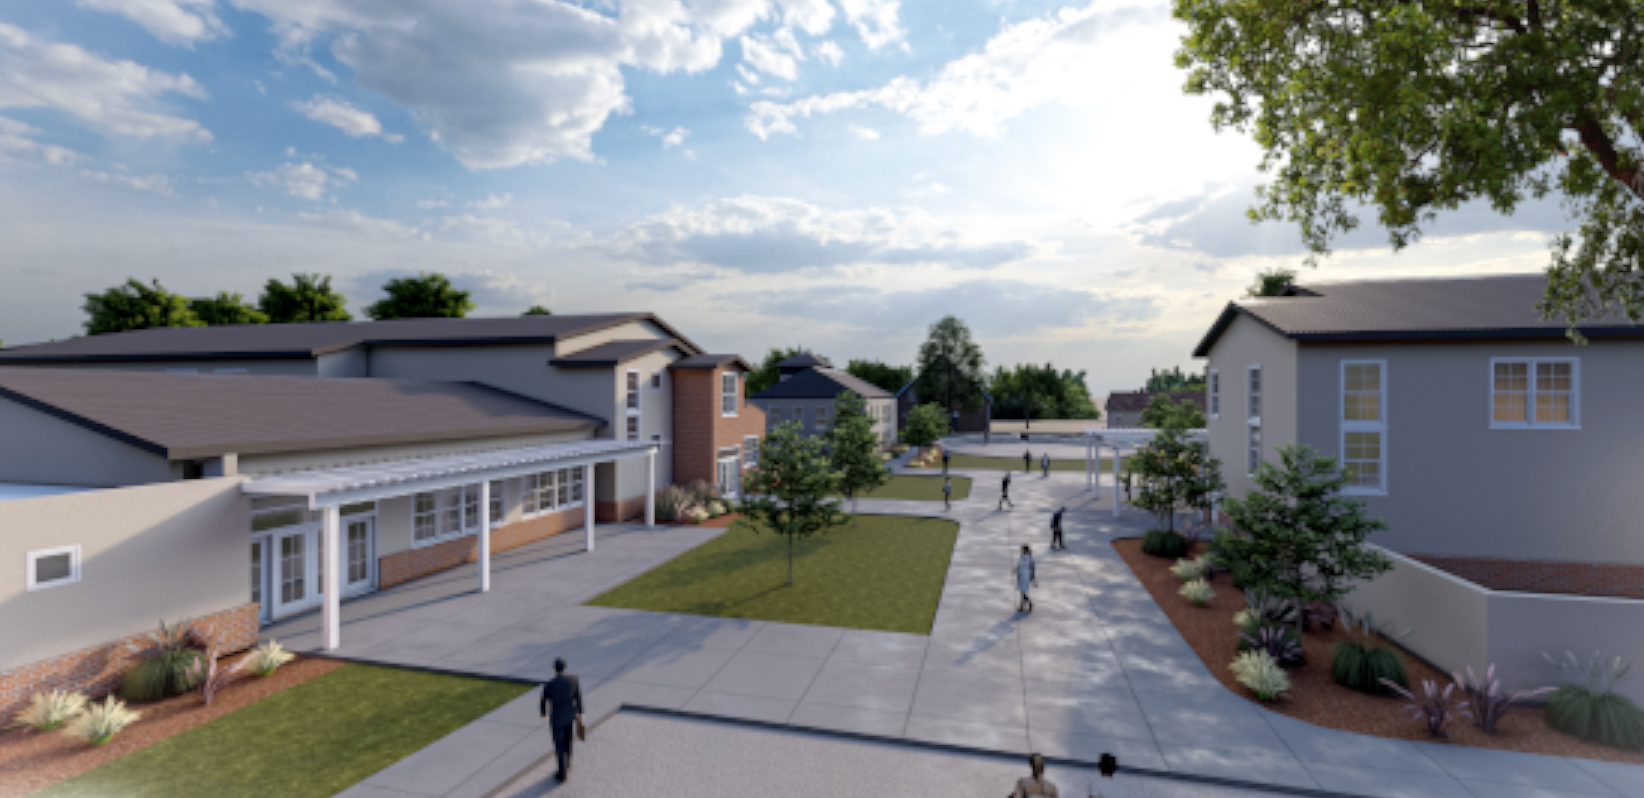 McCurdy Ministries Master Plan & Campus Improvements